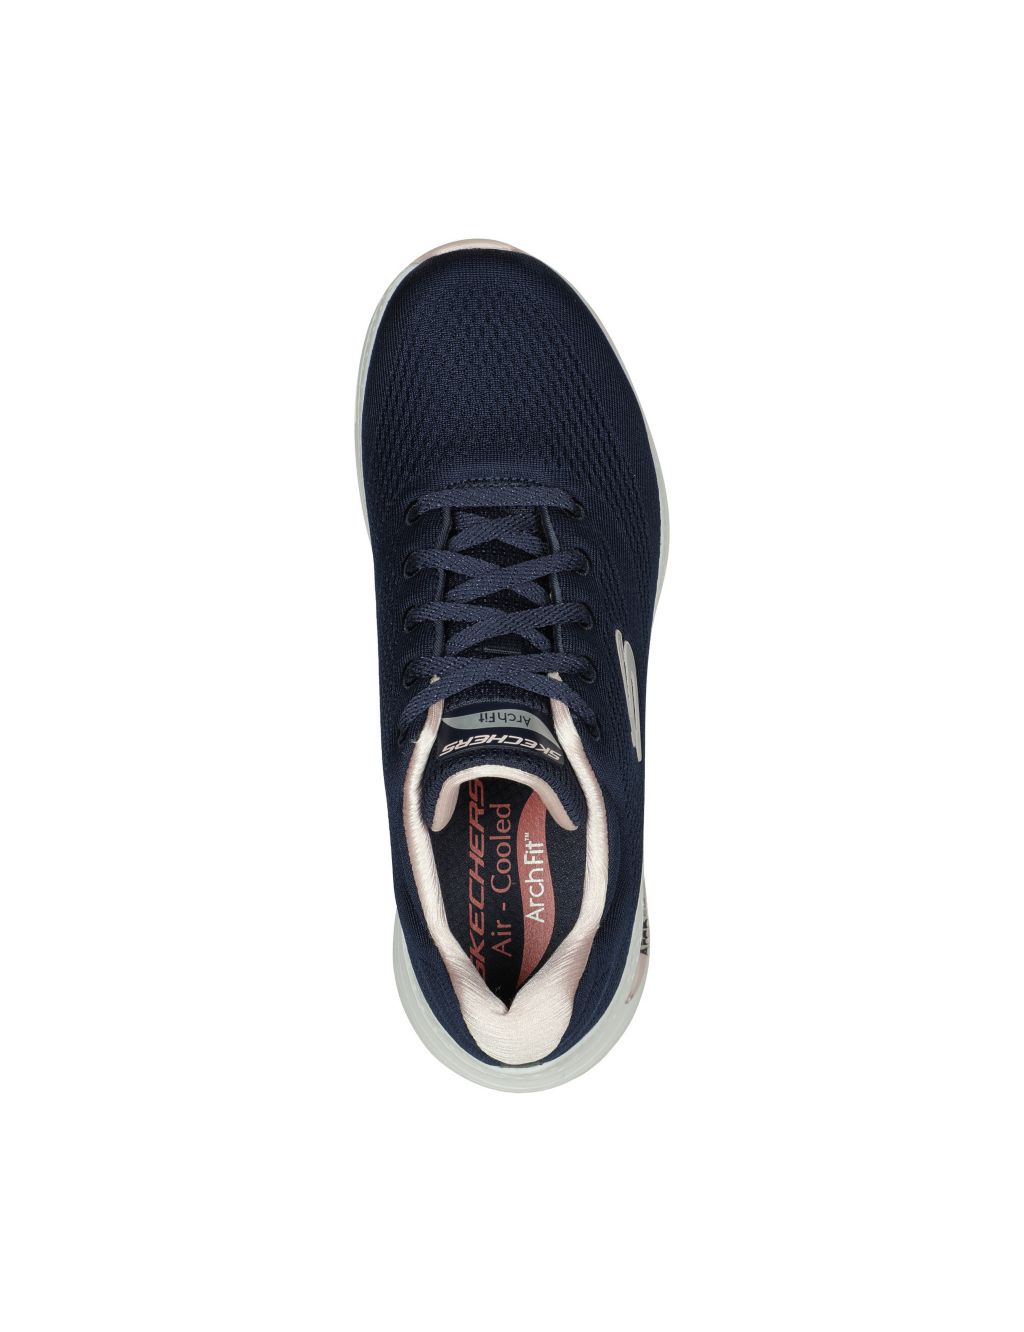 Arch Fit Big Appeal Lace Up Trainers image 3